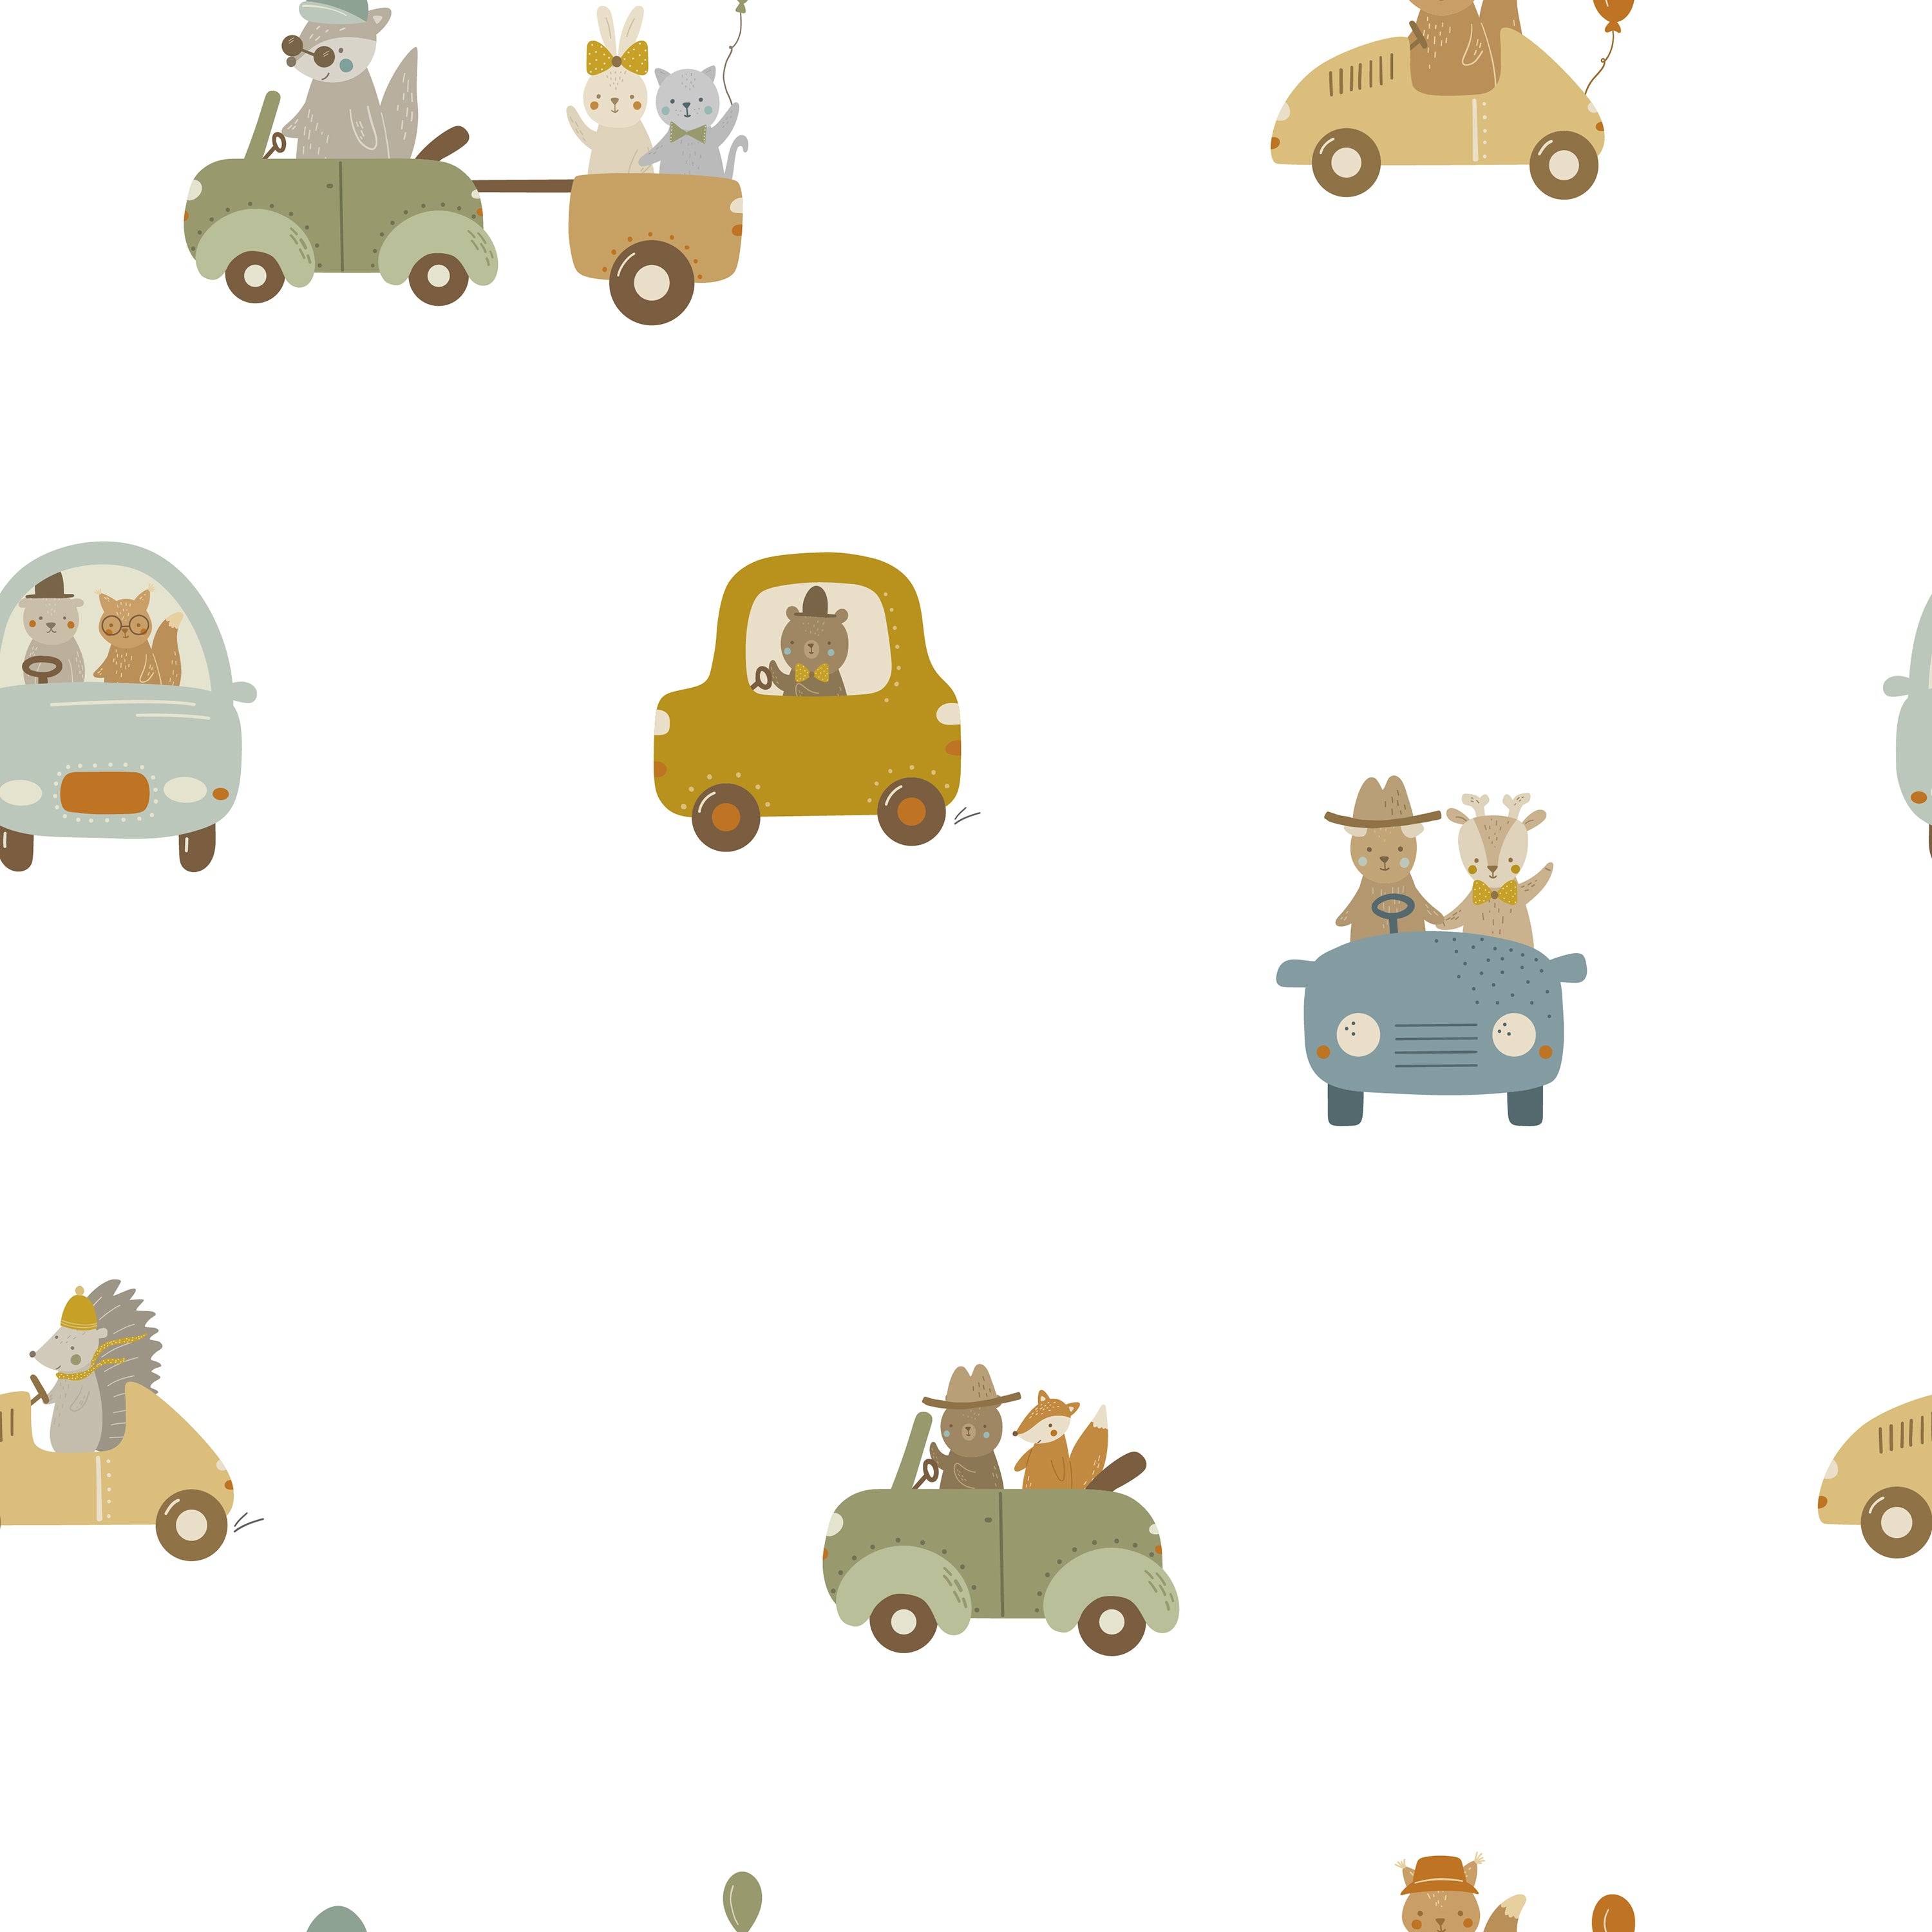 Close-up view of the Road Trip Wallpaper featuring whimsical illustrations of various animals in vehicles, including a lion in a yellow car, a fox and rabbit in a green convertible, and a hedgehog driving a classic blue car, all set on a light background with playful road and cloud motifs.